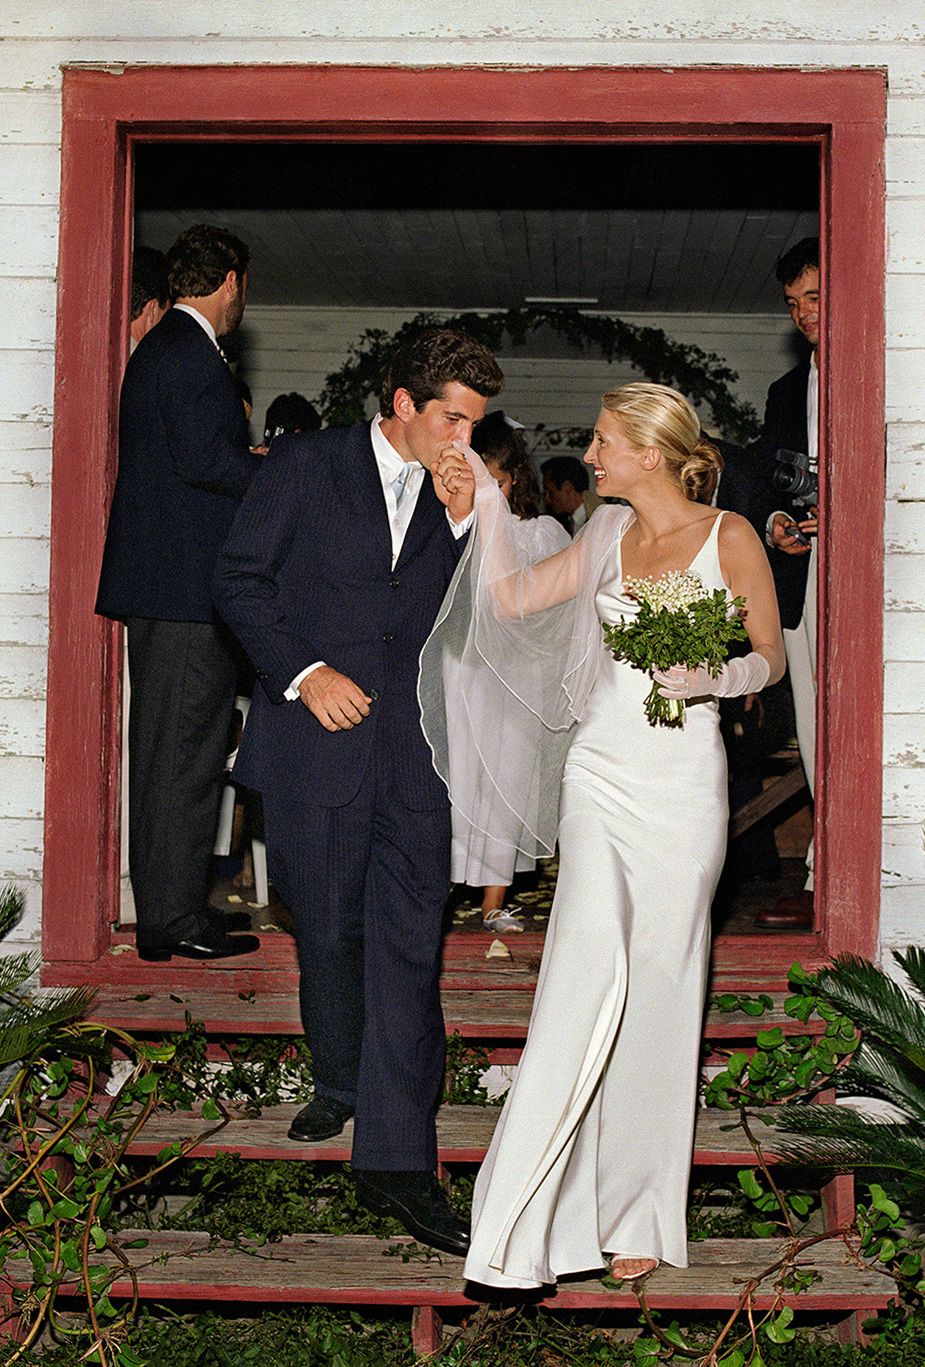 Carolyn Bessette and John F. Kennedy Jr. were married in a secret ceremony on Cumberland Island, off the coast of Georgia, on September 21, 1996. The evening ceremony took place in the wood-frame Brack Chapel of the First African Baptist Church.Sep 21, 1996